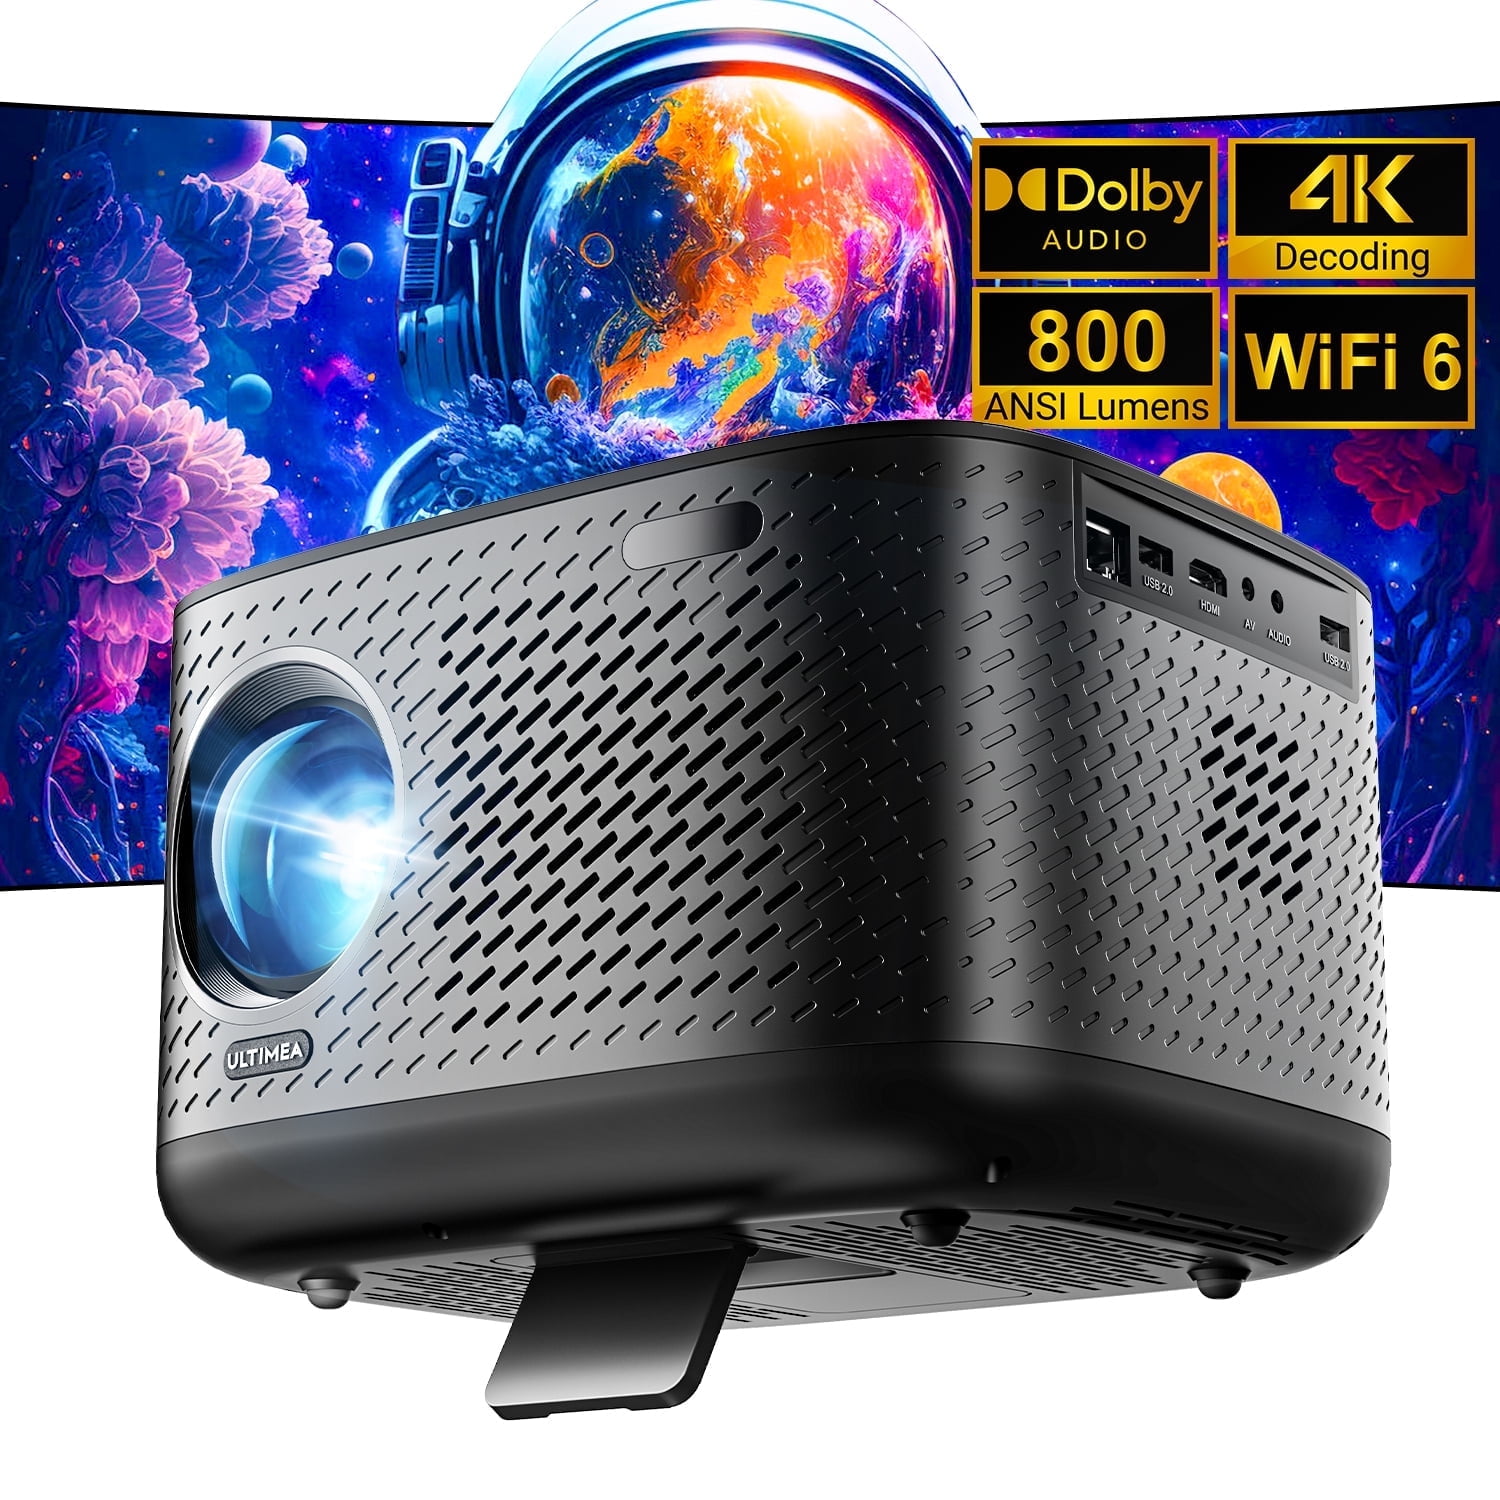 UHD38x - Bright, 4K UHD gaming and home entertainment projector